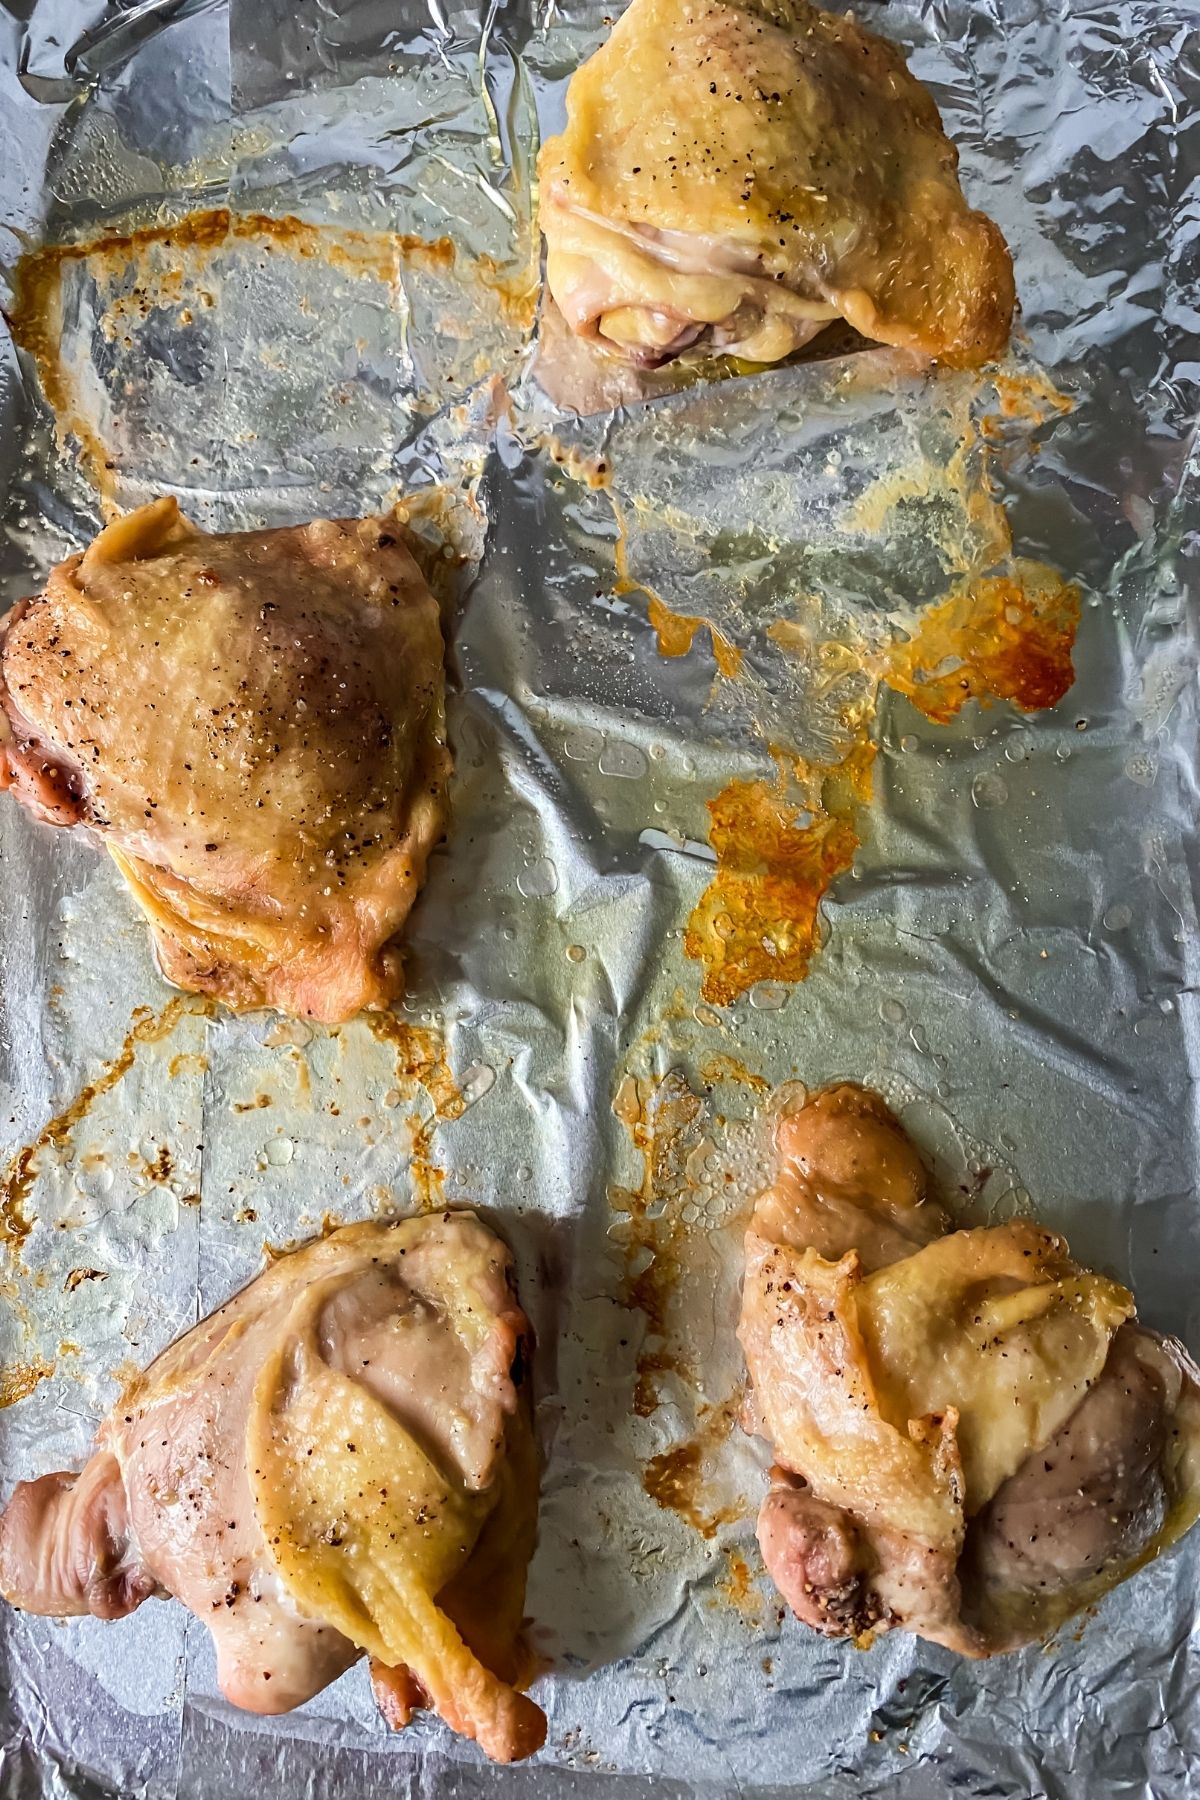 Baked chicken thighs on foil lined baking sheet